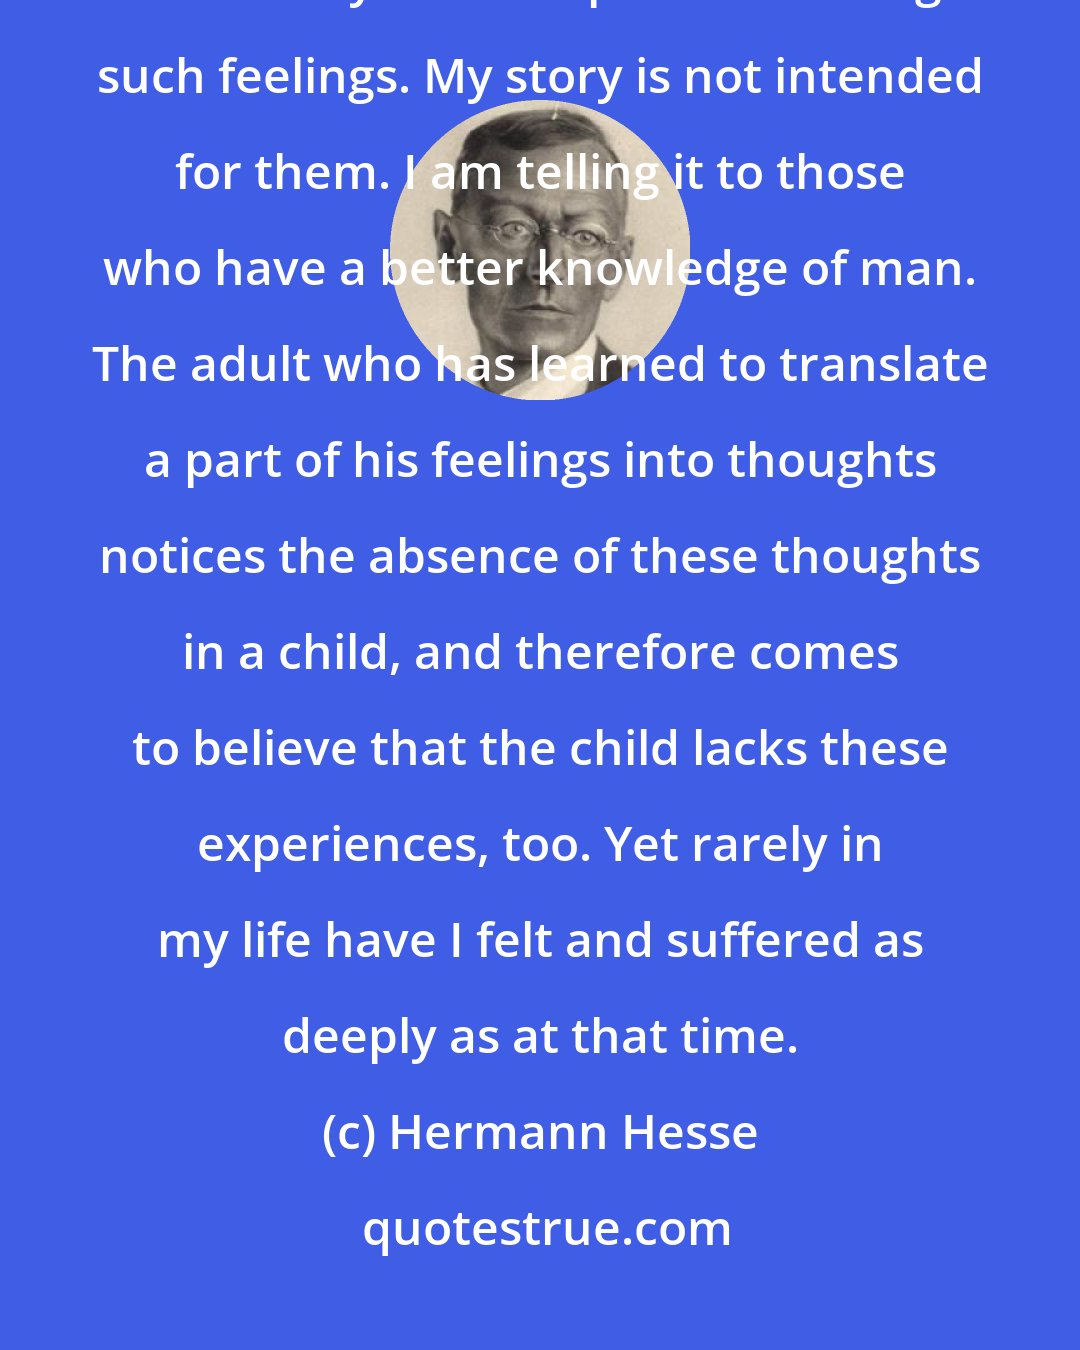 Hermann Hesse: I realize that some people will not believe that a child of little more than ten years is capable of having such feelings. My story is not intended for them. I am telling it to those who have a better knowledge of man. The adult who has learned to translate a part of his feelings into thoughts notices the absence of these thoughts in a child, and therefore comes to believe that the child lacks these experiences, too. Yet rarely in my life have I felt and suffered as deeply as at that time.